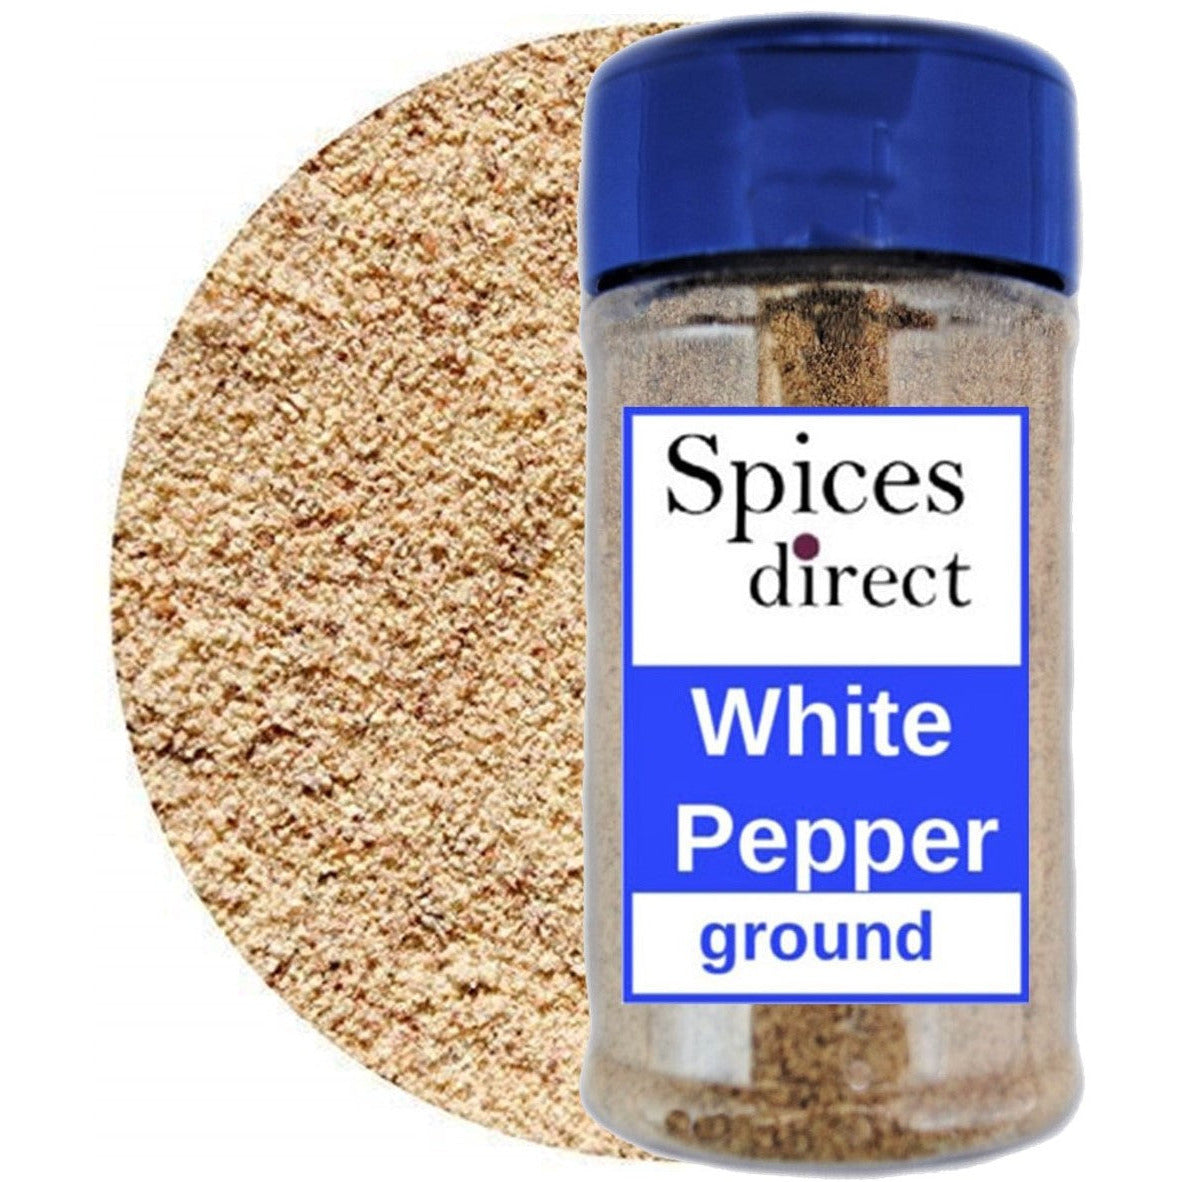 white pepper ground pepper spices herbs seasonings unique flavors spicy spices shop white pepper black pepper pepper online alternative to salt ground spices seasoning herbs white pepper vs black pepperPepper White Ground 1.5oz Easy Shaker - Spices Direct Spices Unique Flavors LLC 